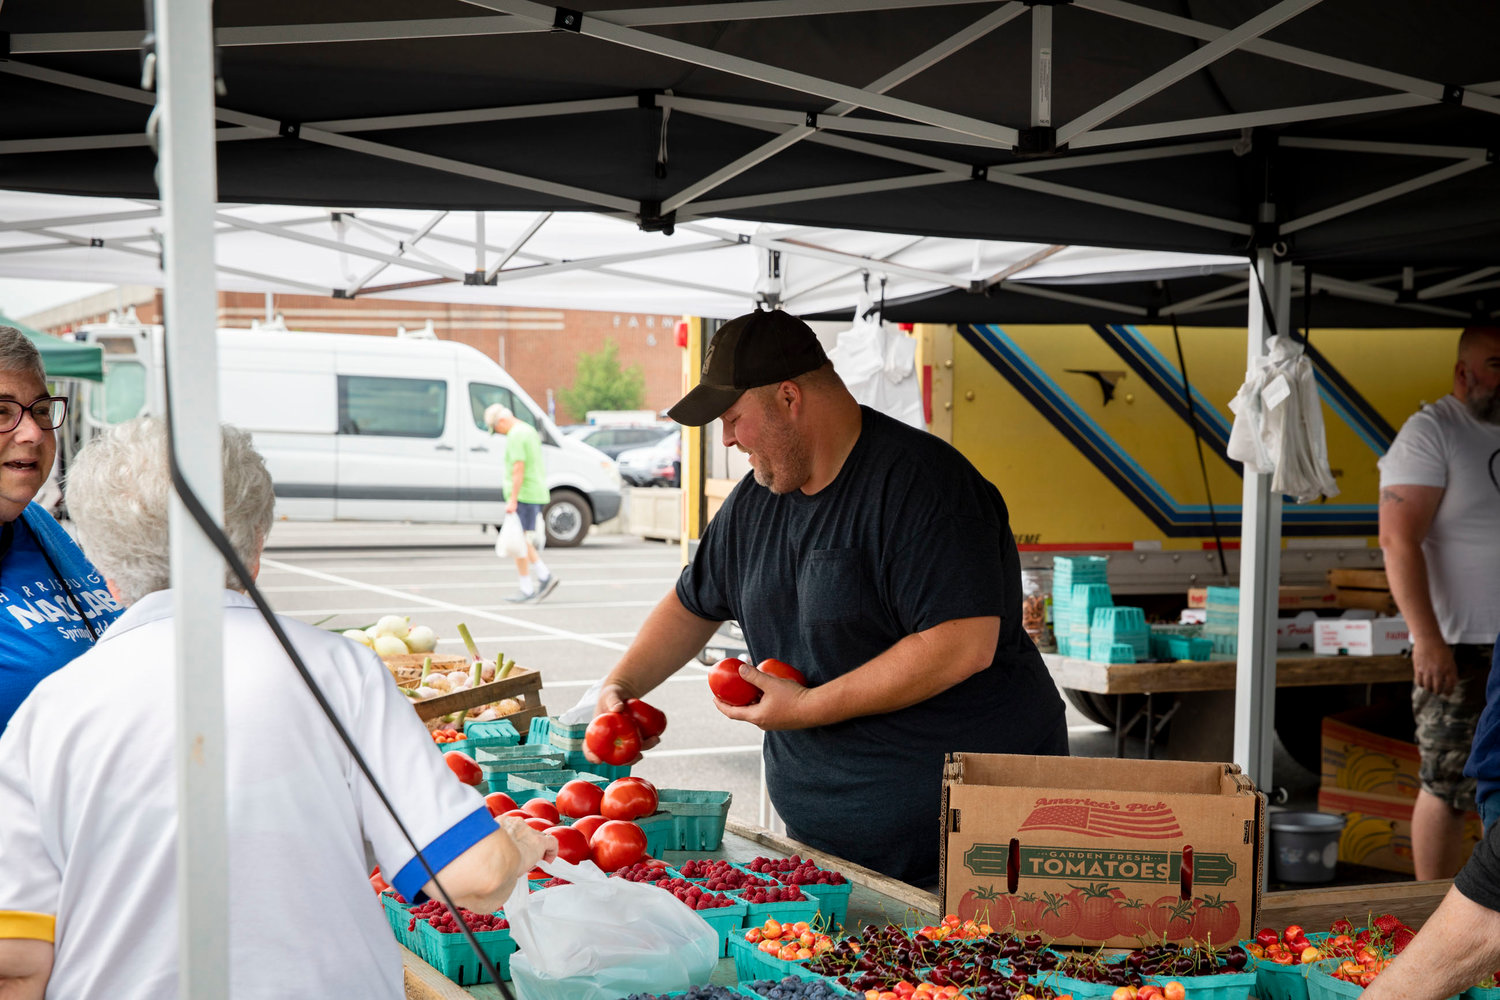 The Wolf Administration reminds seniors and families about the Farmers Market Nutrition Program, which addresses food insecurity and supports Pennsylvania farmers, in Harrisburg, PA on June 21, 2022.